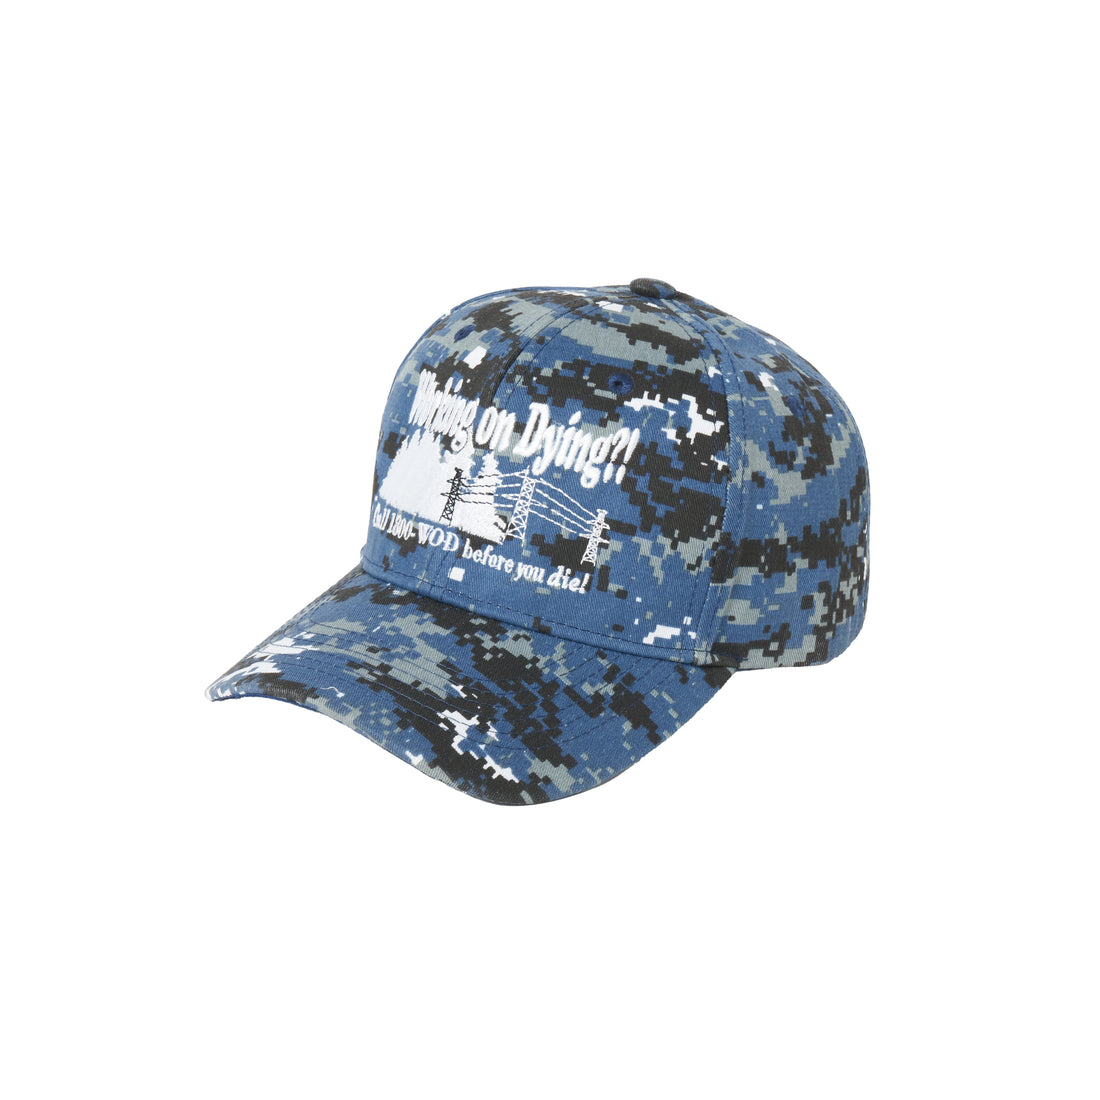 CALL Working On Dying HAT (BLUE)